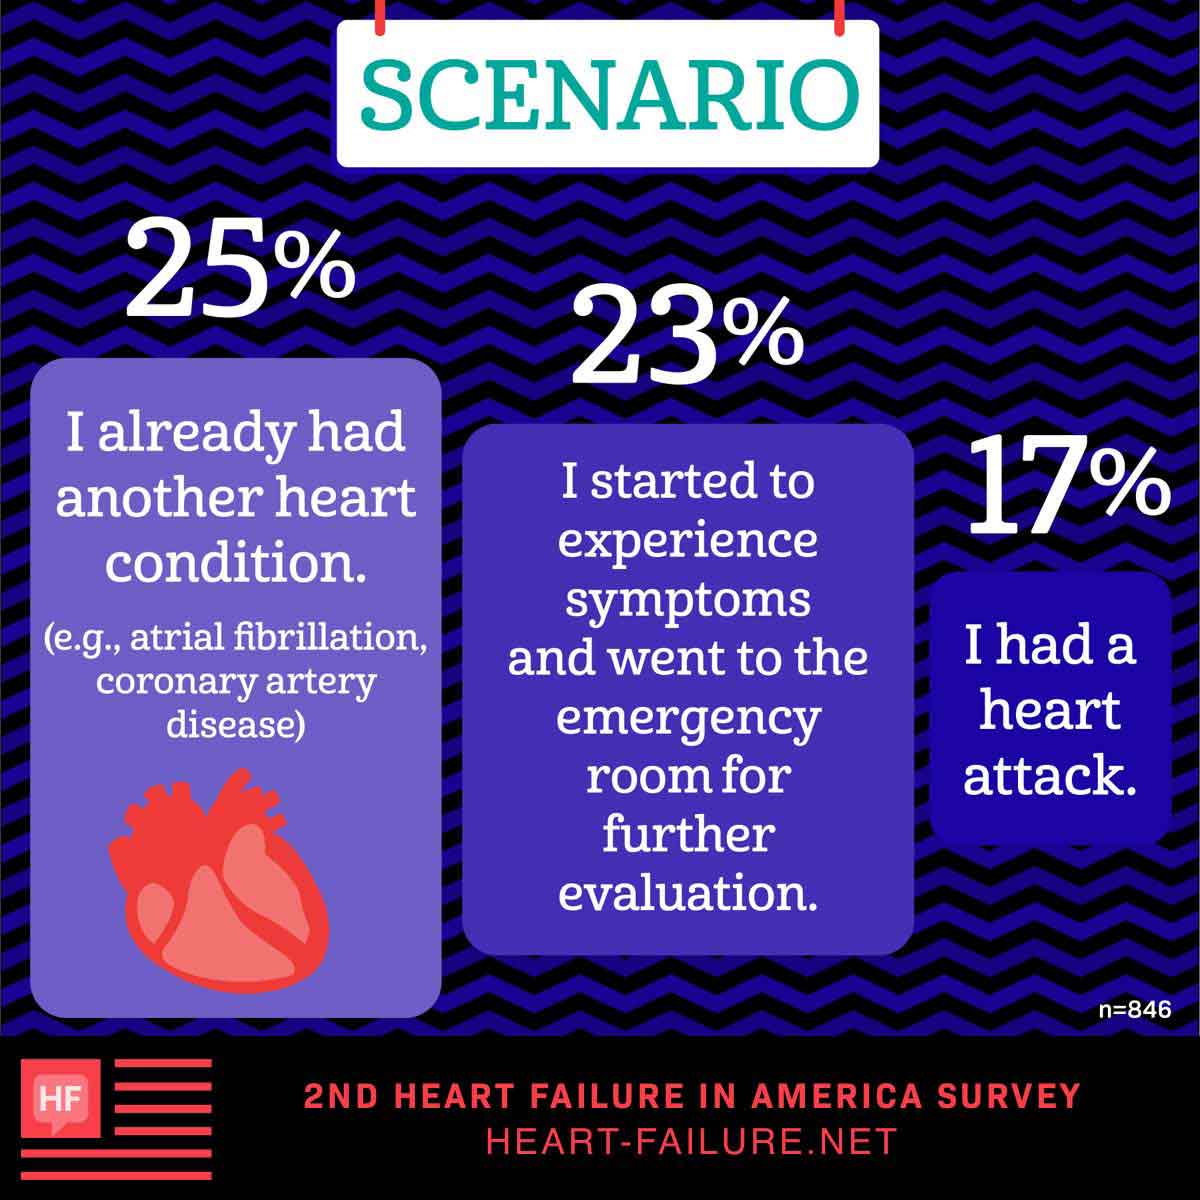 Scenario: I already had another heart condition (eg, atrial fibrillation, coronary artery disease): 25%, I started to experience symptoms (other than a heart attack) and went immediately to the emergency room for further evaluation: 23% I had a heart attack: (17%) 